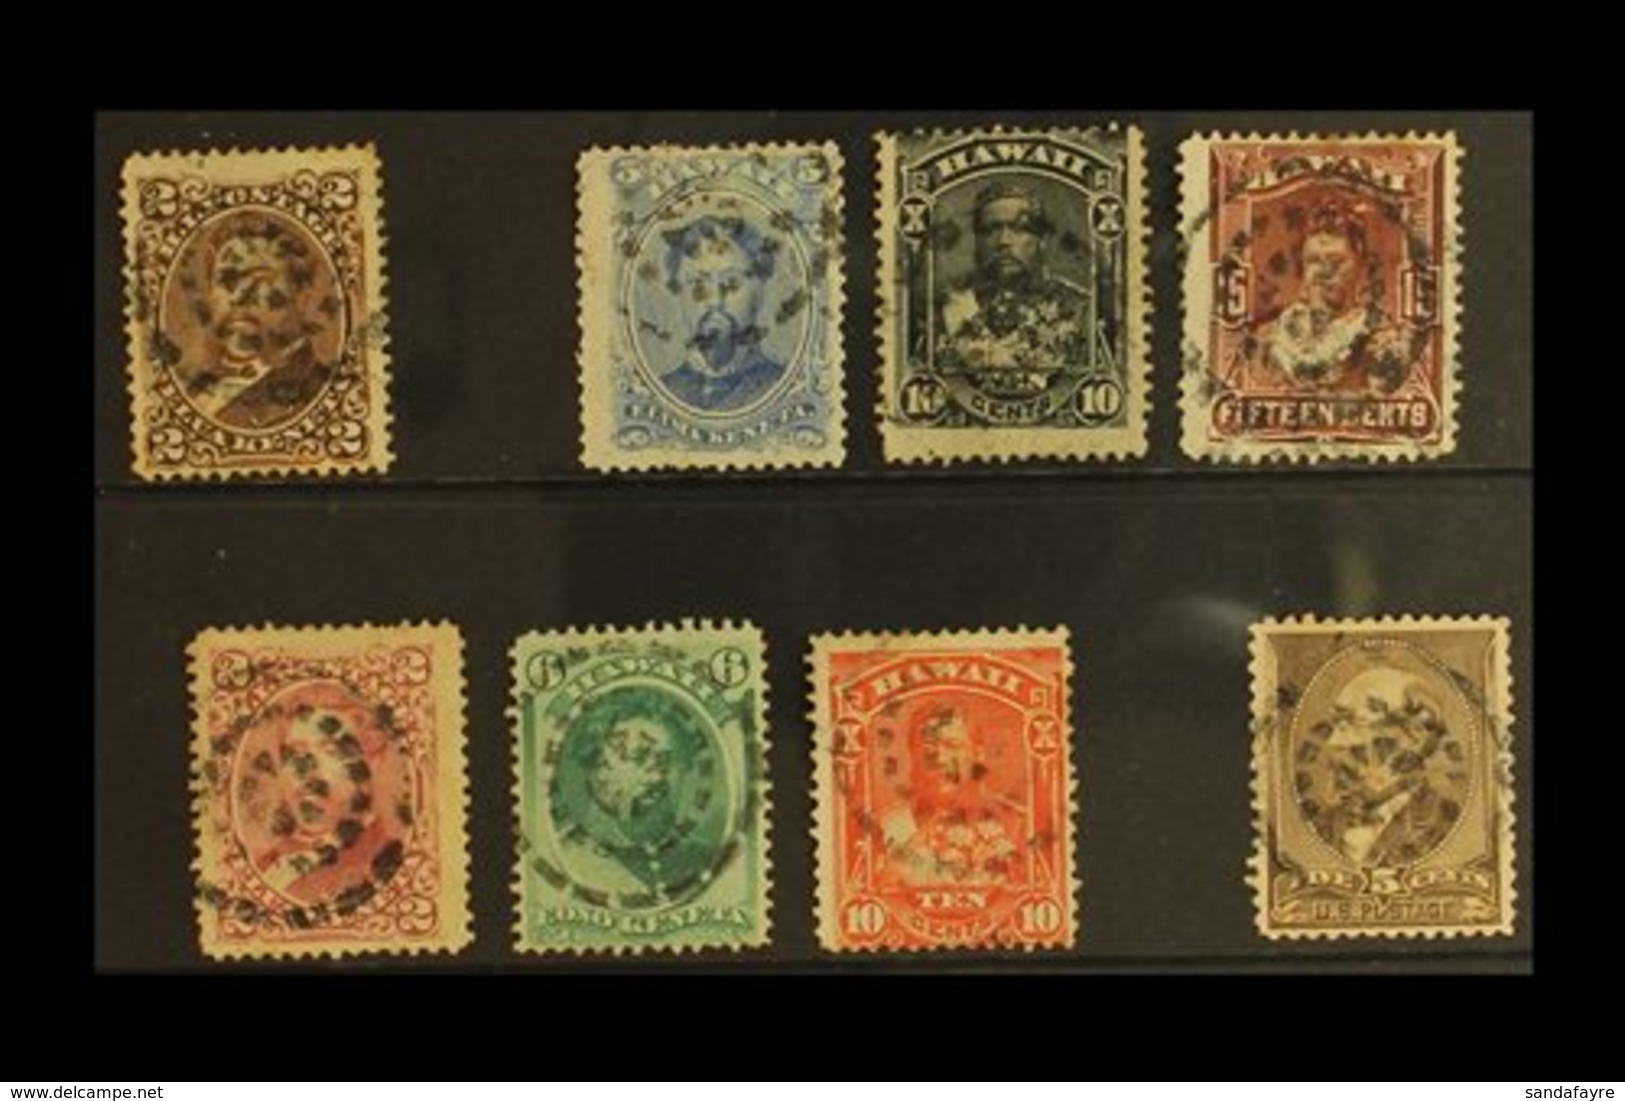 POSTMARKS DISTINCTIVE TARGET STYLE CANCEL On Range Of 1875-86 Issues, All Different With Values To 15c, Plus USA 1882 5c - Hawai